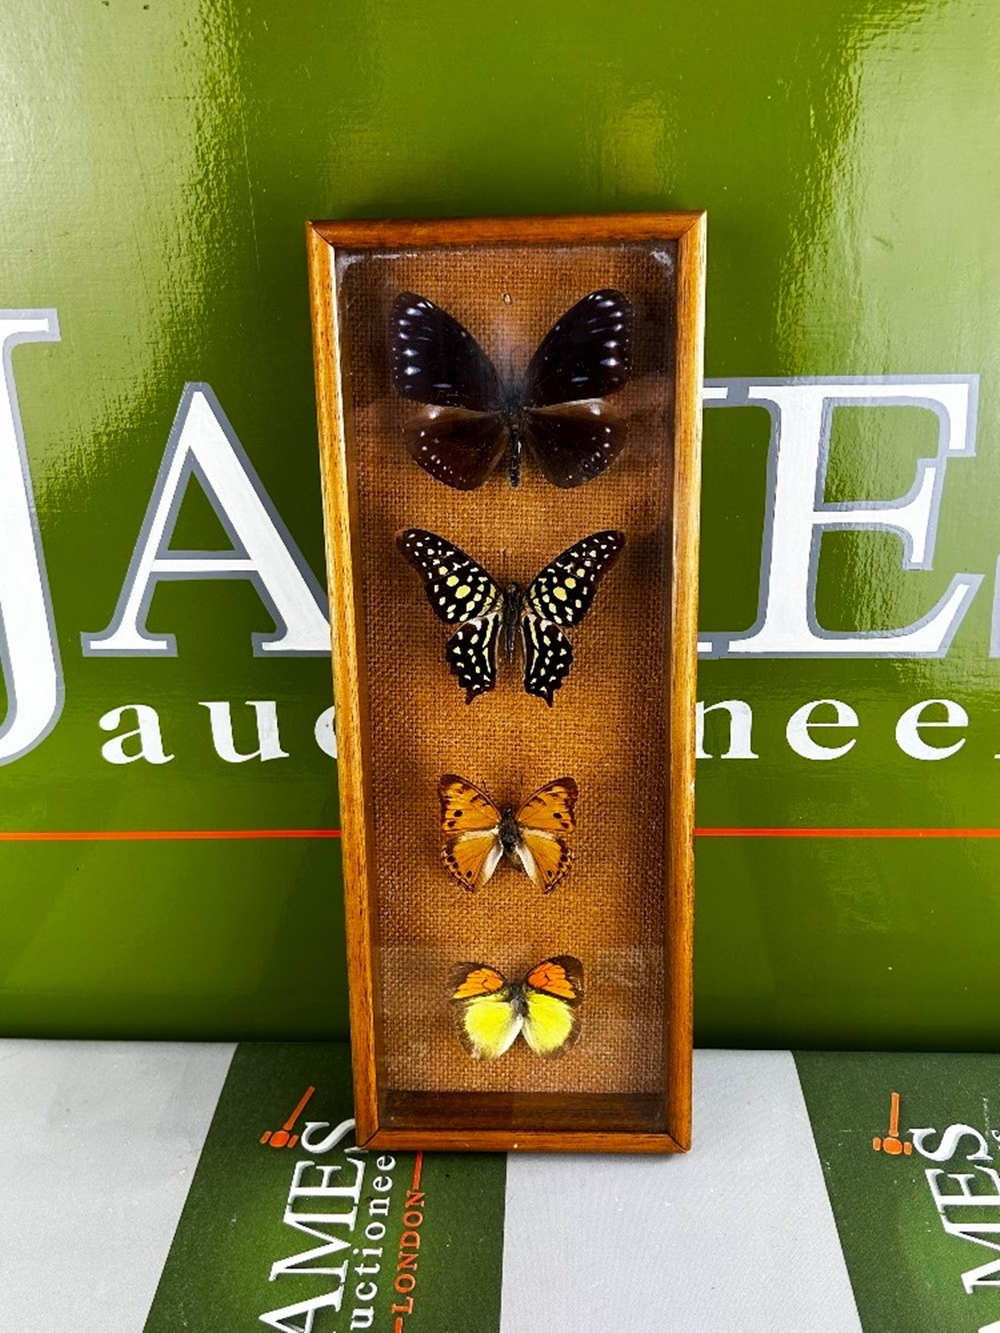 SOLD VIA BUY IT NOW-PLEASE DO NOT BID-Taxidermy of Butterfly Collection - Image 2 of 2